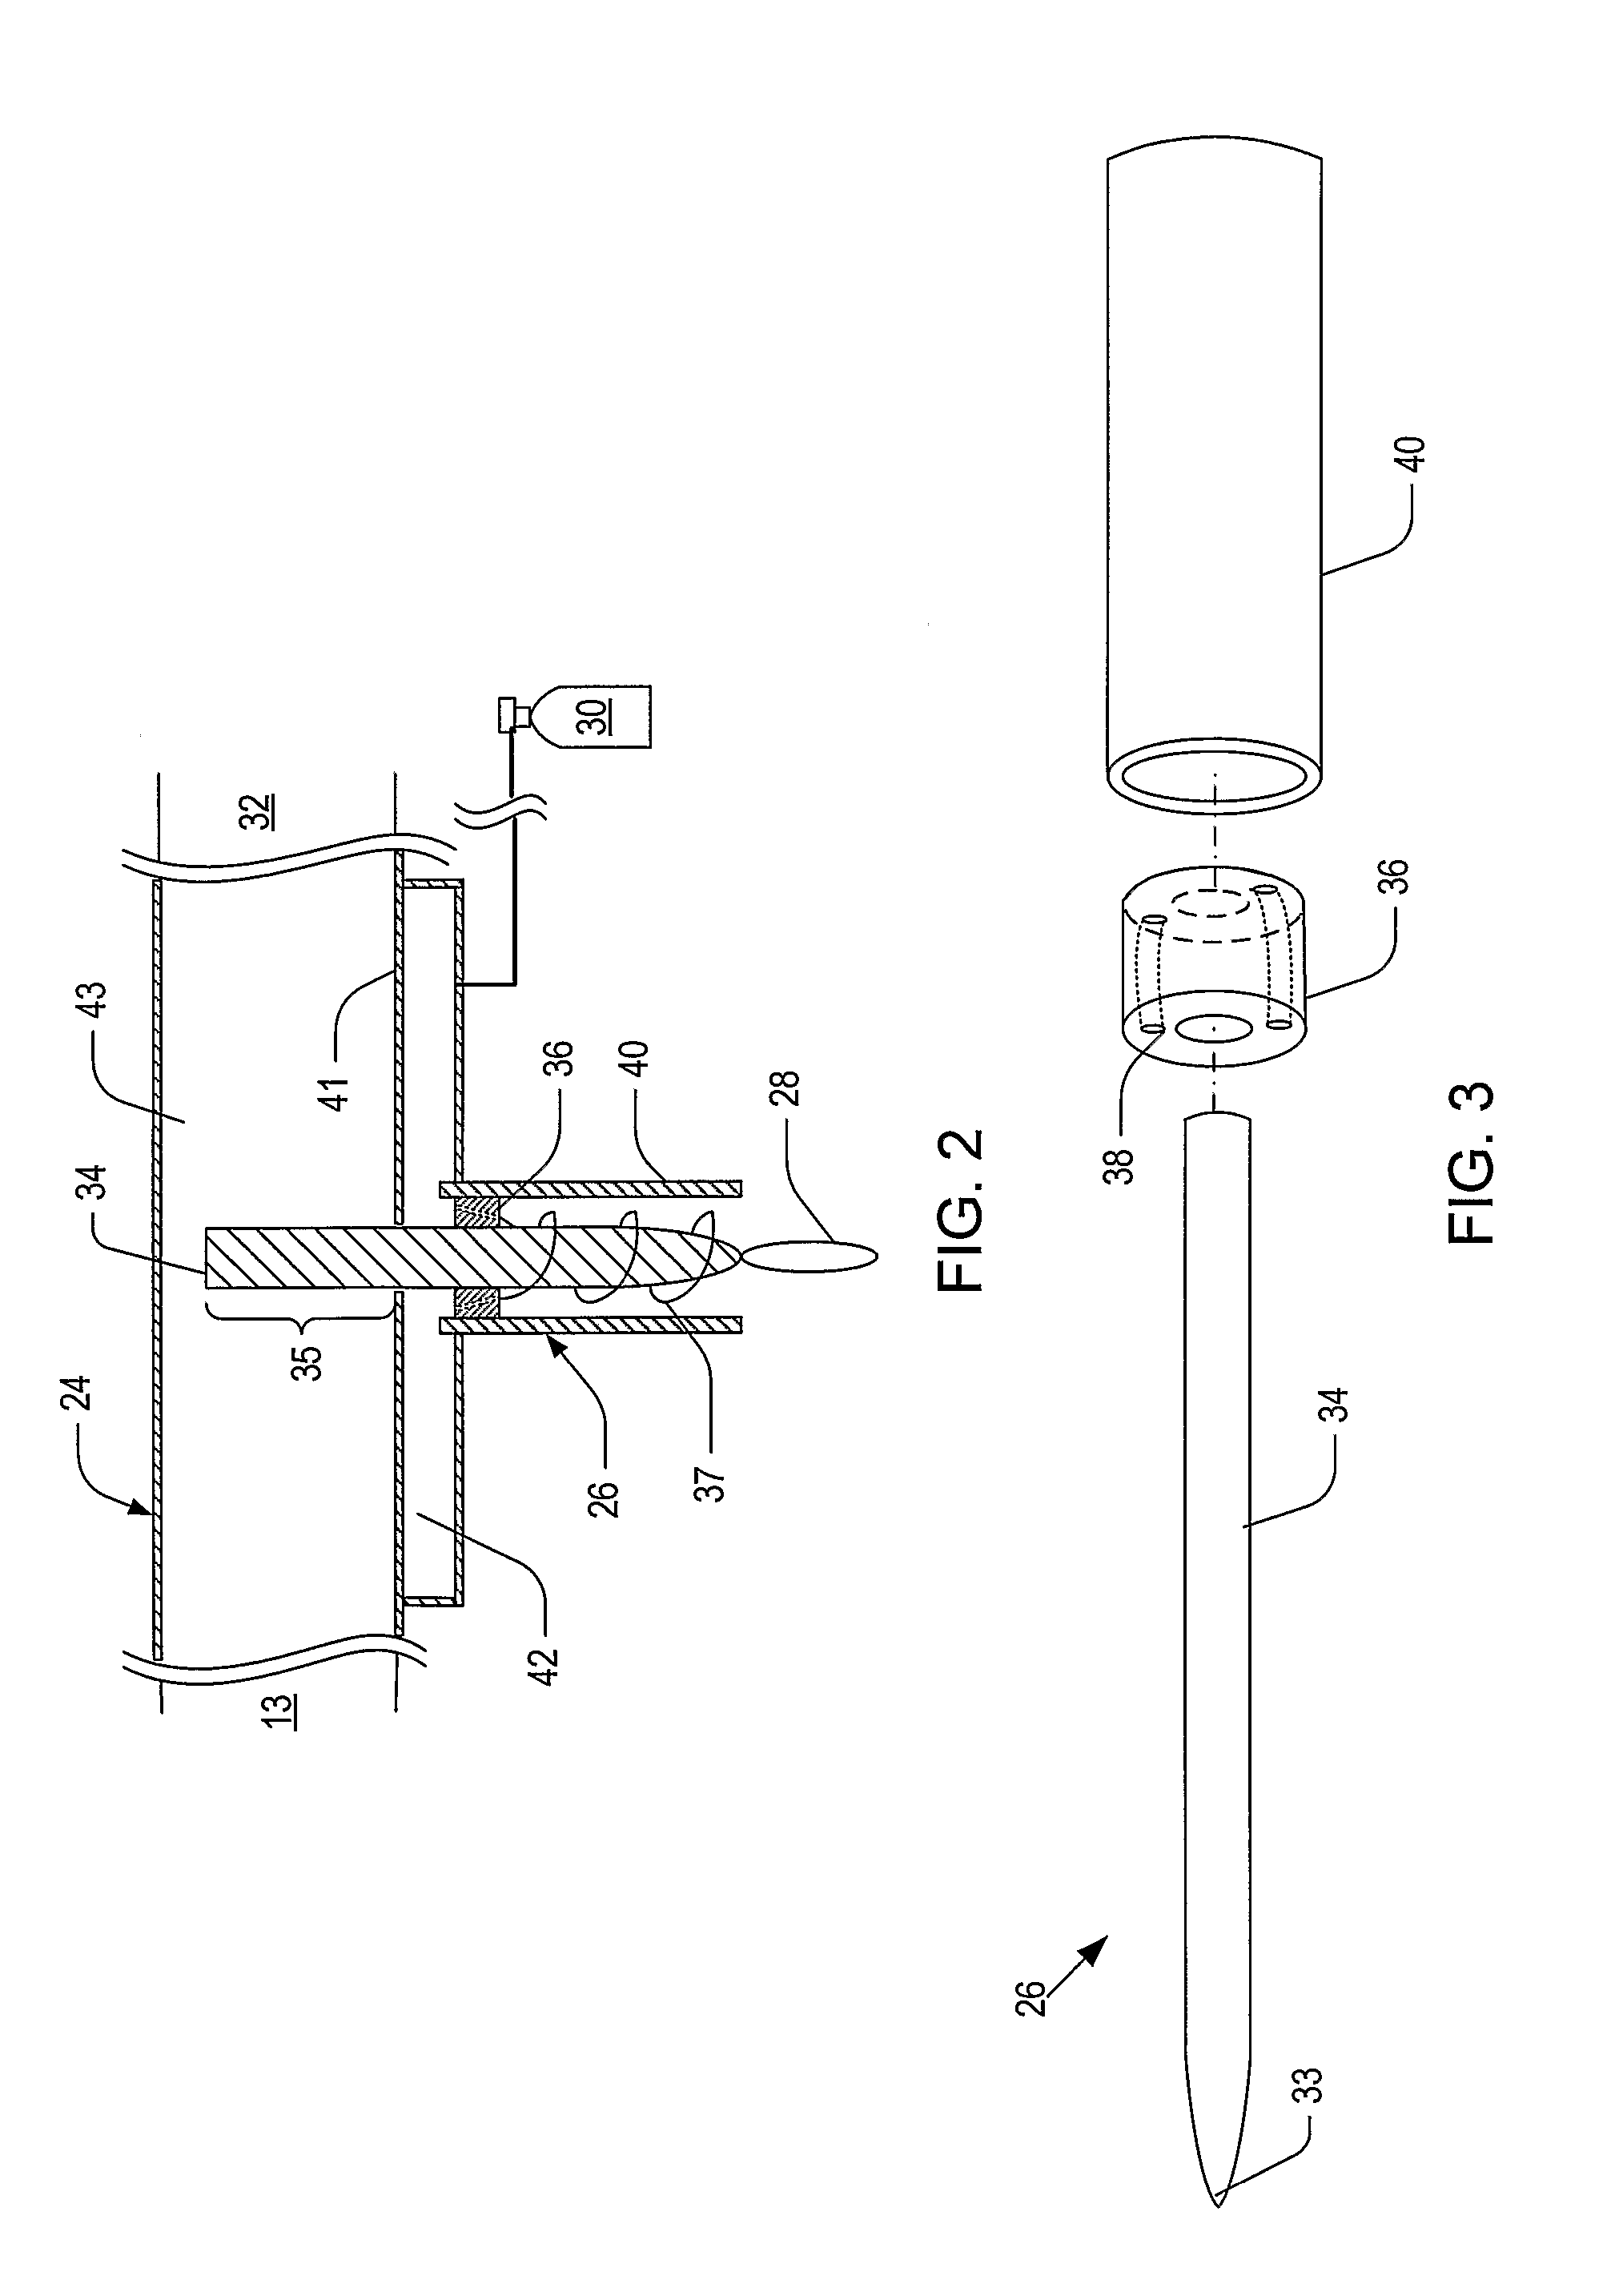 Microwave Plasma Nozzle With Enhanced Plume Stability And Heating Efficiency